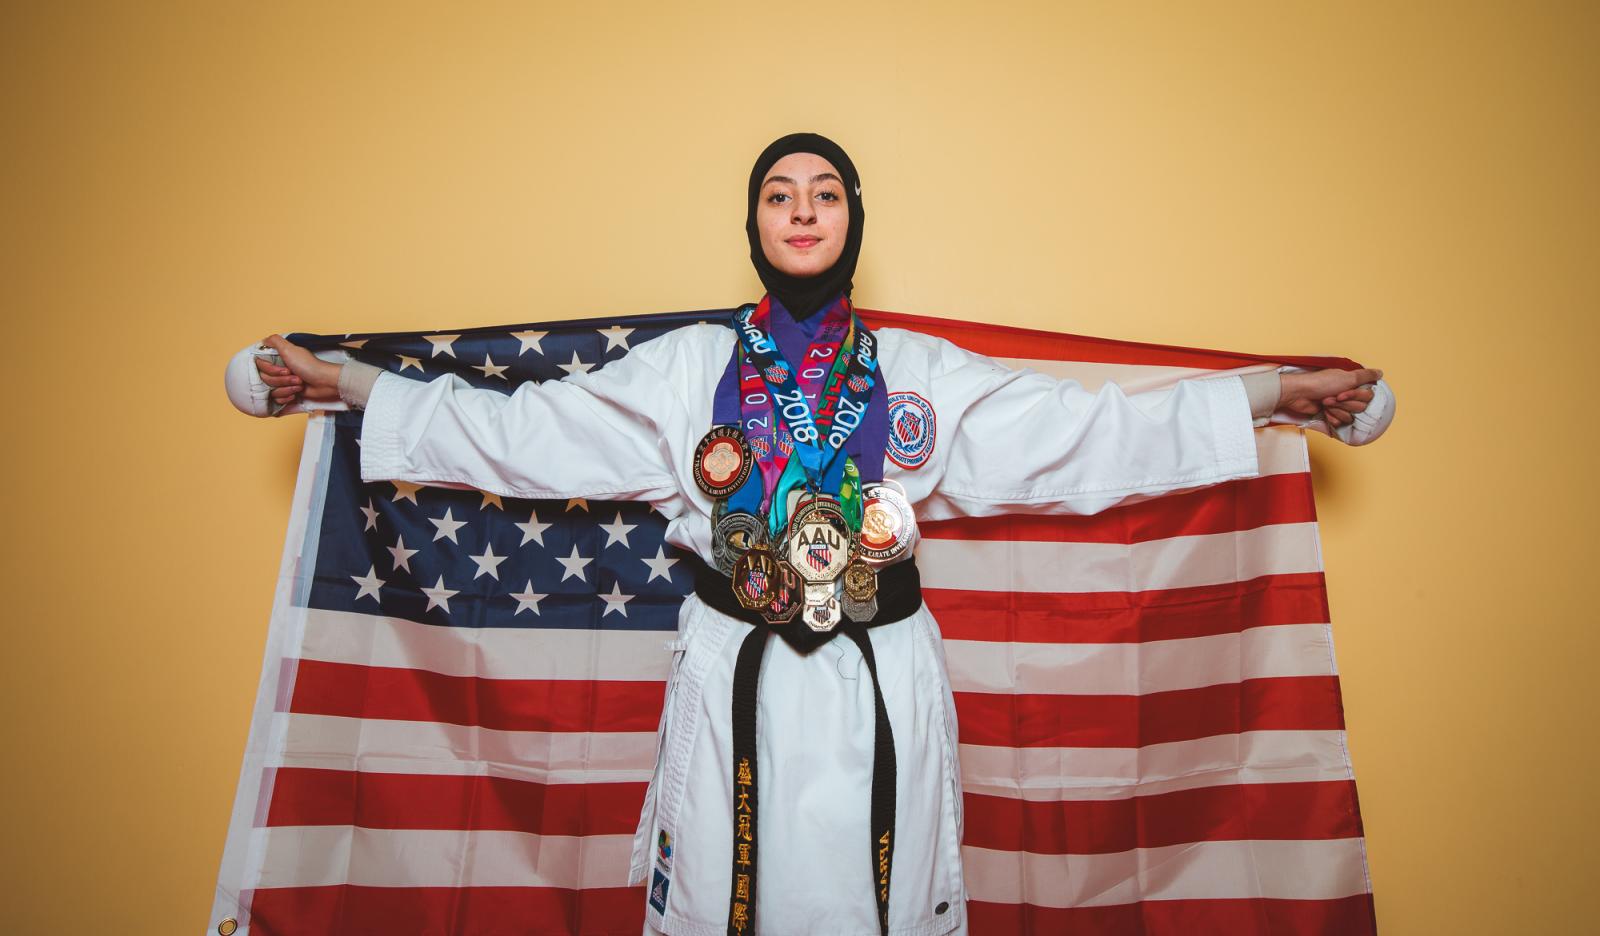 Image from PORTRAITS - Aprar Hassan is a 19-year-old Muslim-American Karate...